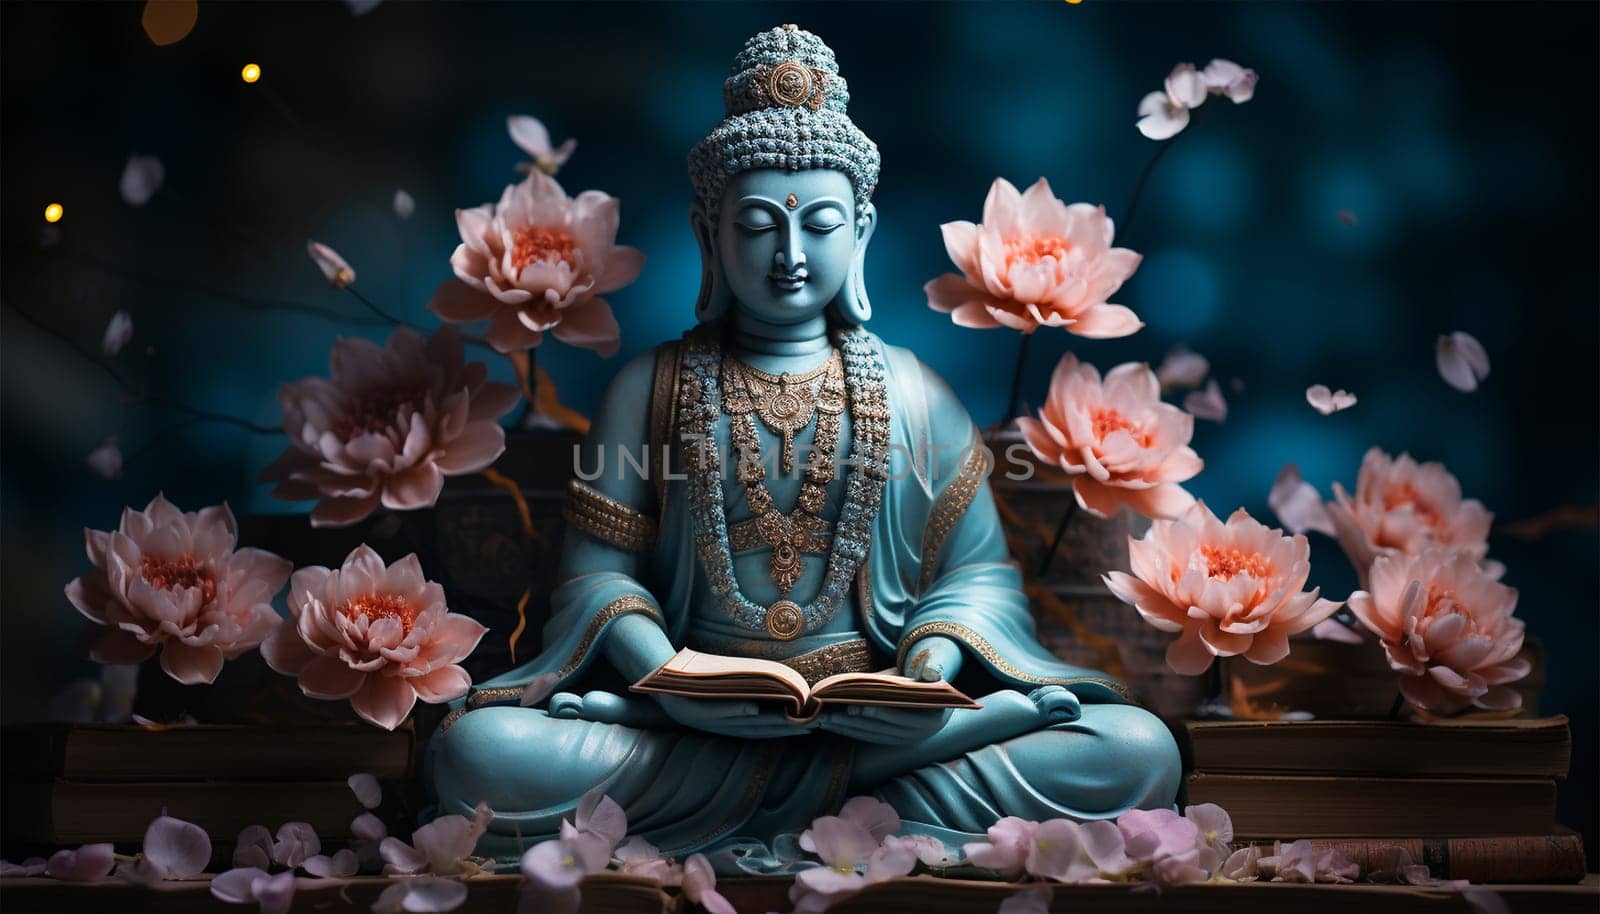 Hindu god. Vishnu, Indian lord of Hinduism. Hari god of ancient India. Hindu deity sitting on lotus flower, holding attributes. Traditional holy divinity. illustration copy space by Annebel146